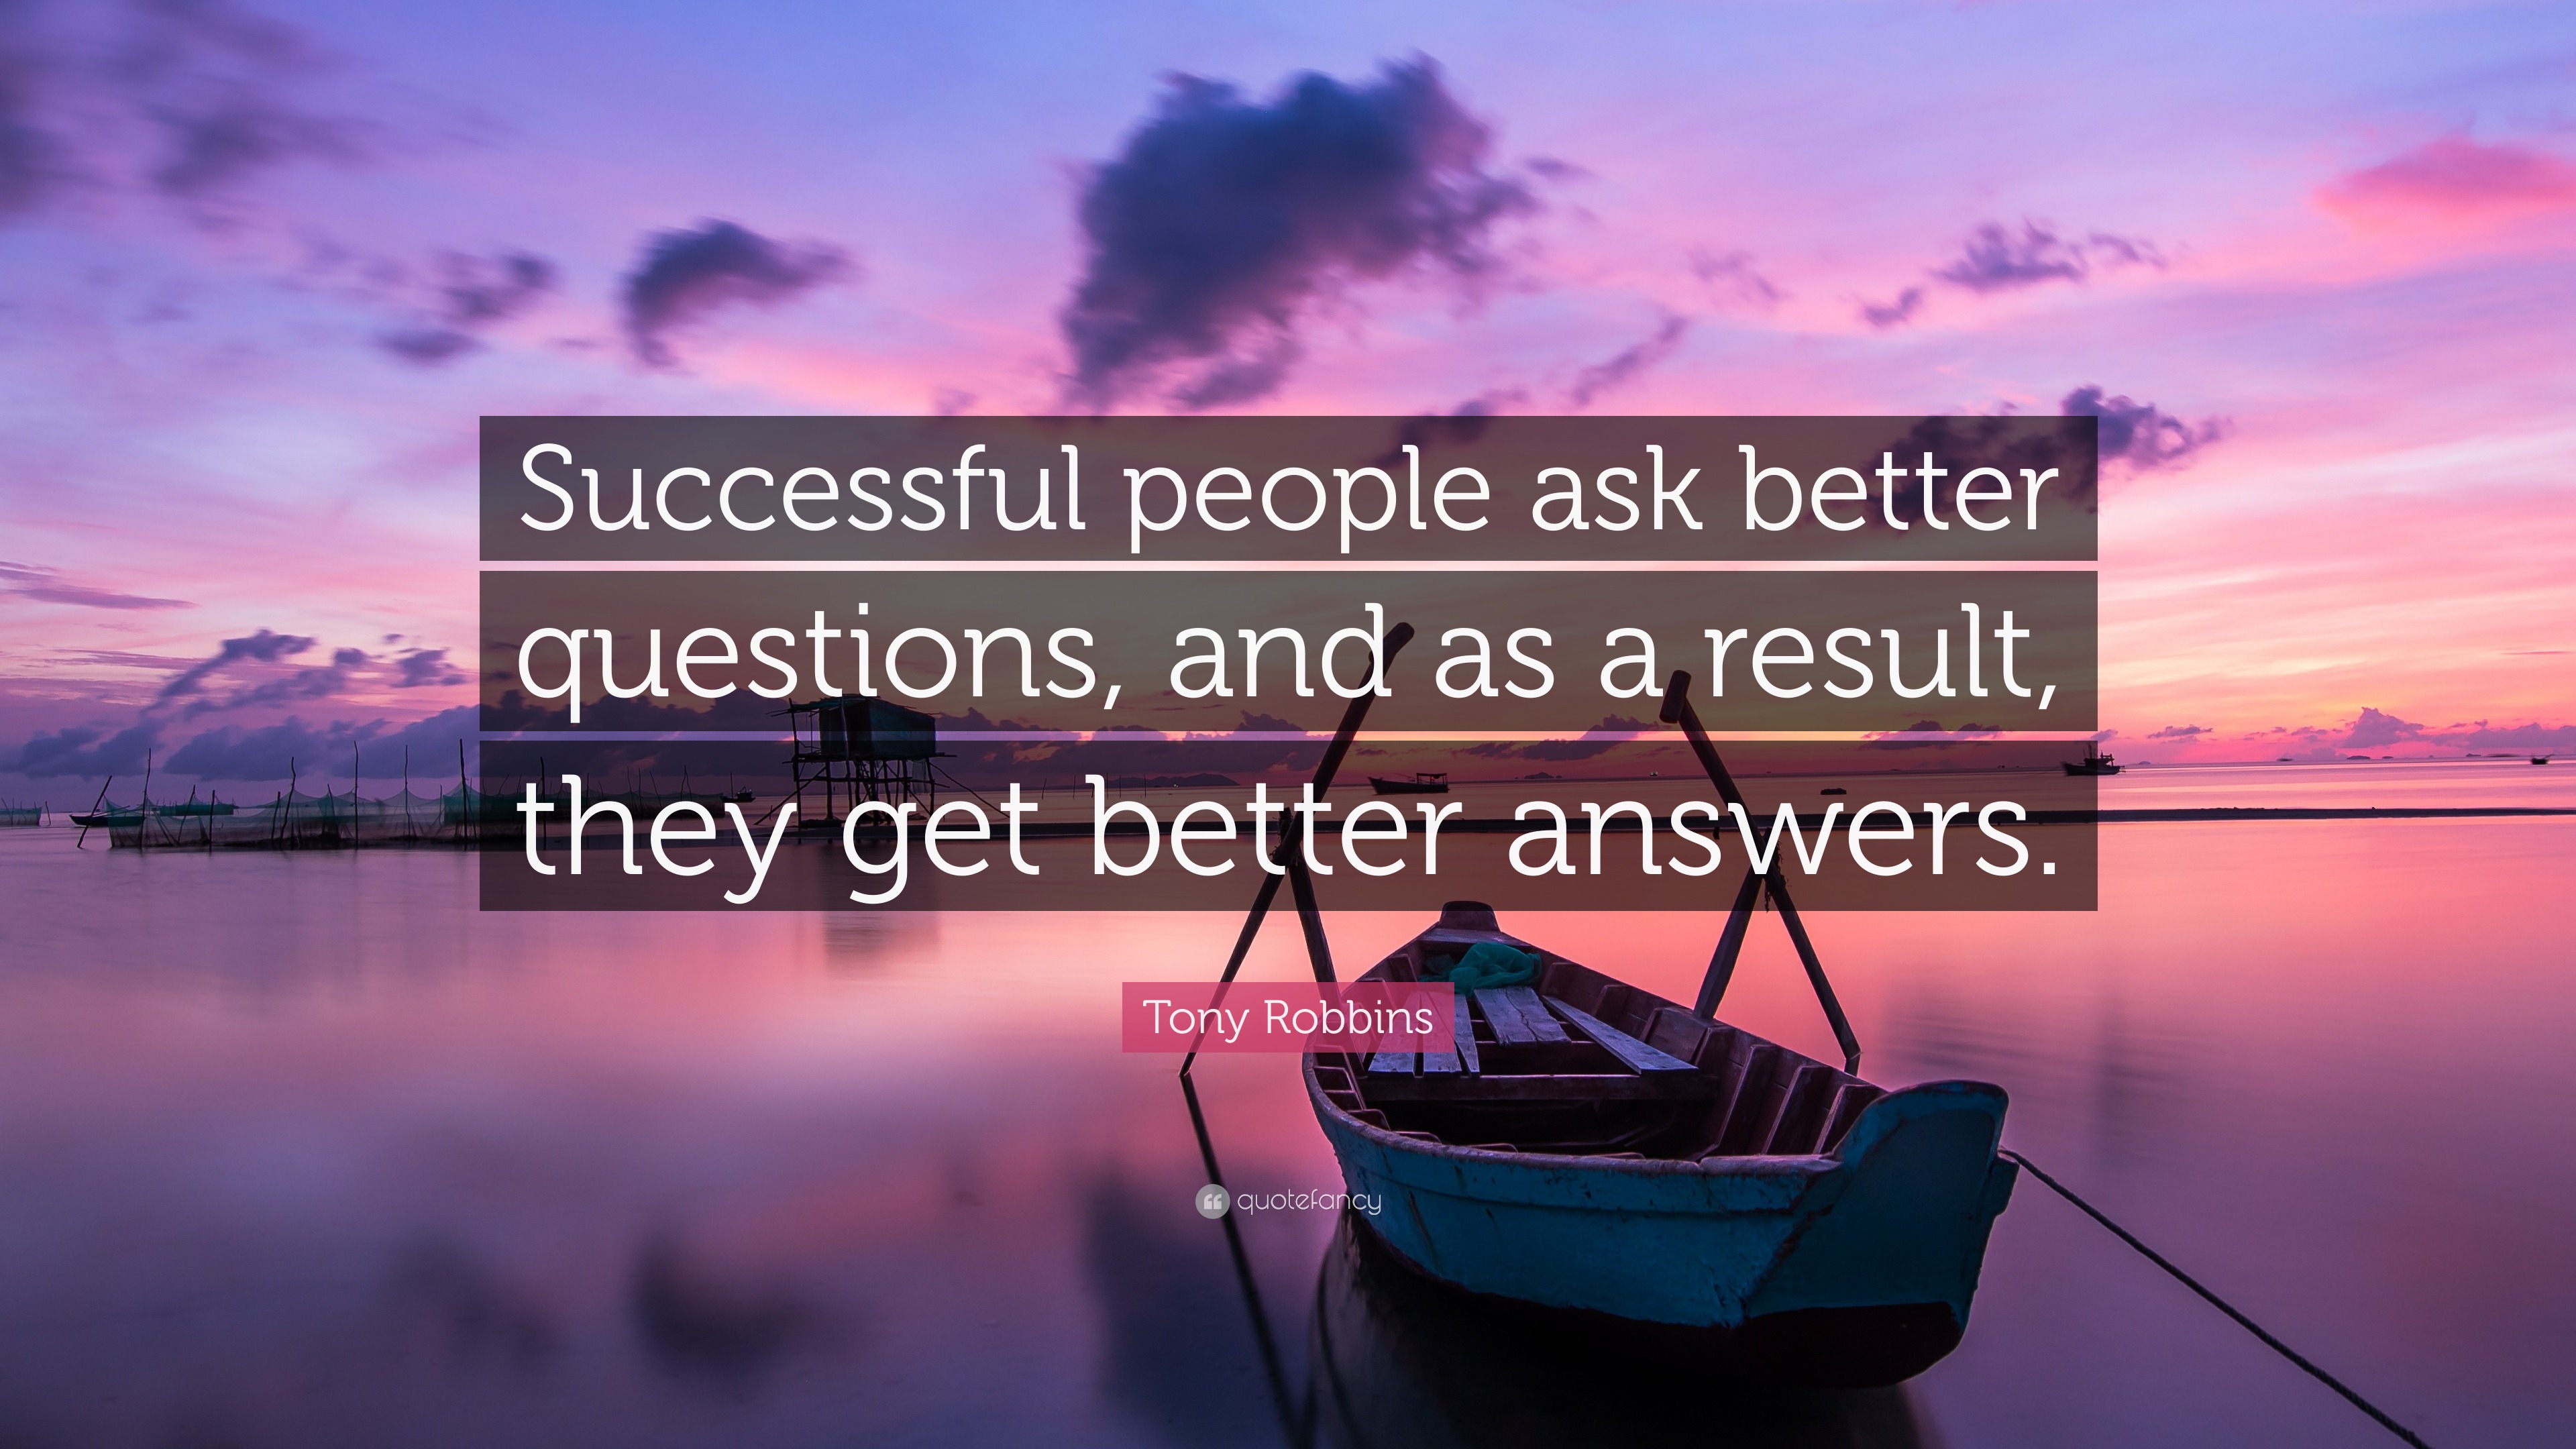 2009590 Tony Robbins Quote Successful people ask better questions and as a